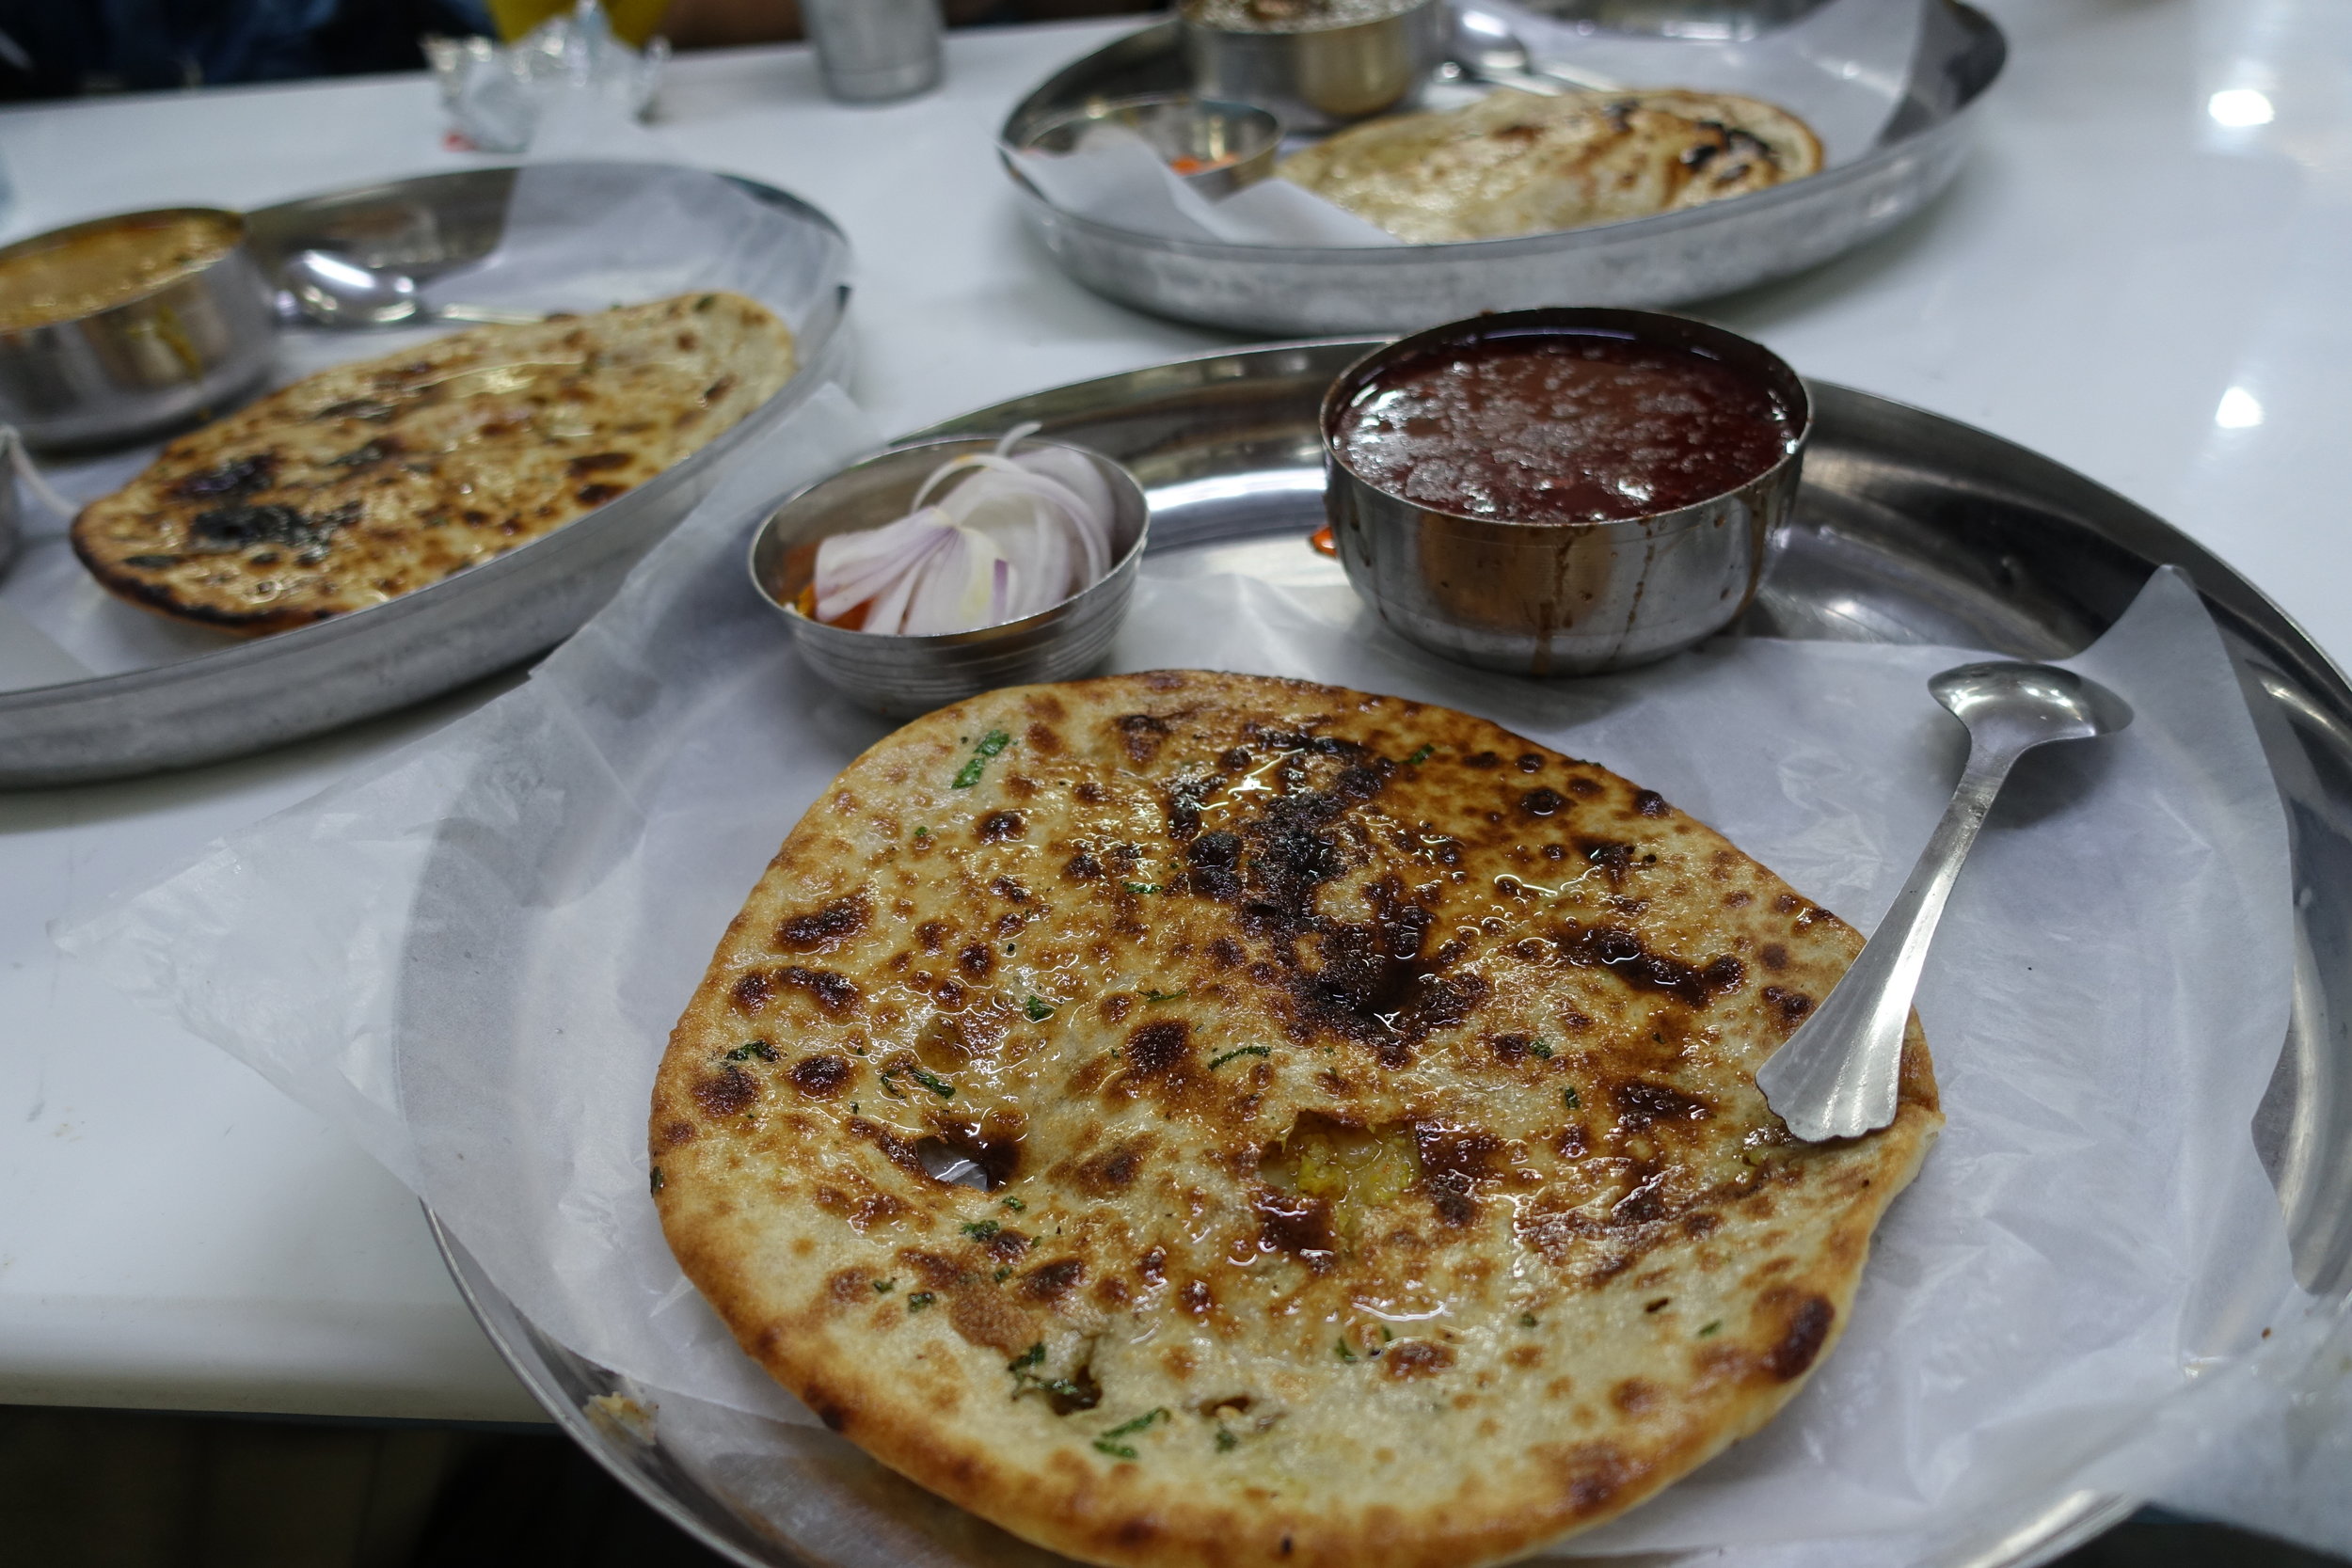  Anthony Bourdain visited this place, Kesar Da Dhaba, because of its masterful craftsmanship of meals like these.  